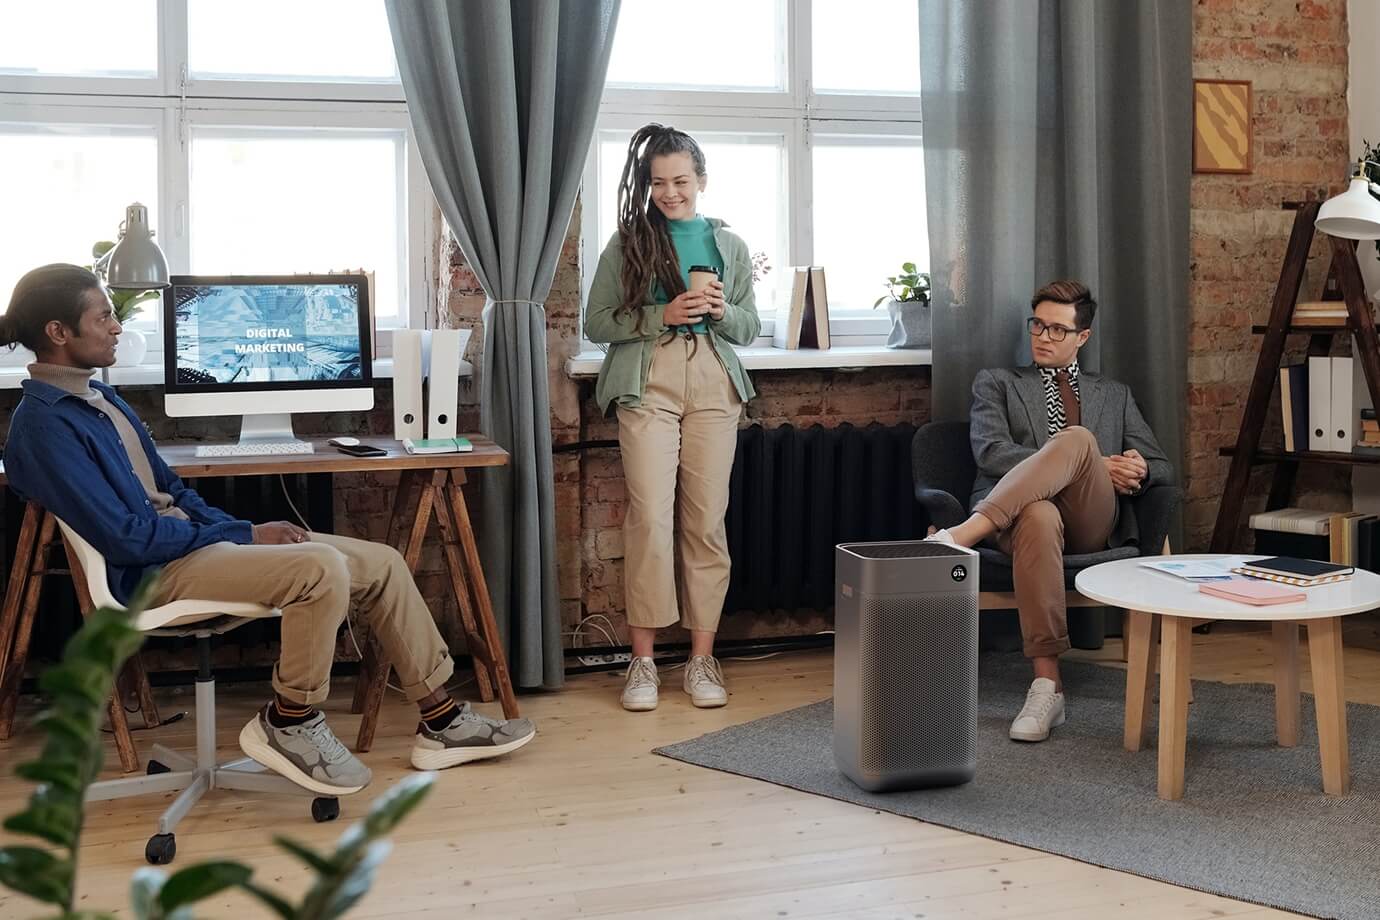 Fresh air at work: 4 reasons your office should have an air purifier